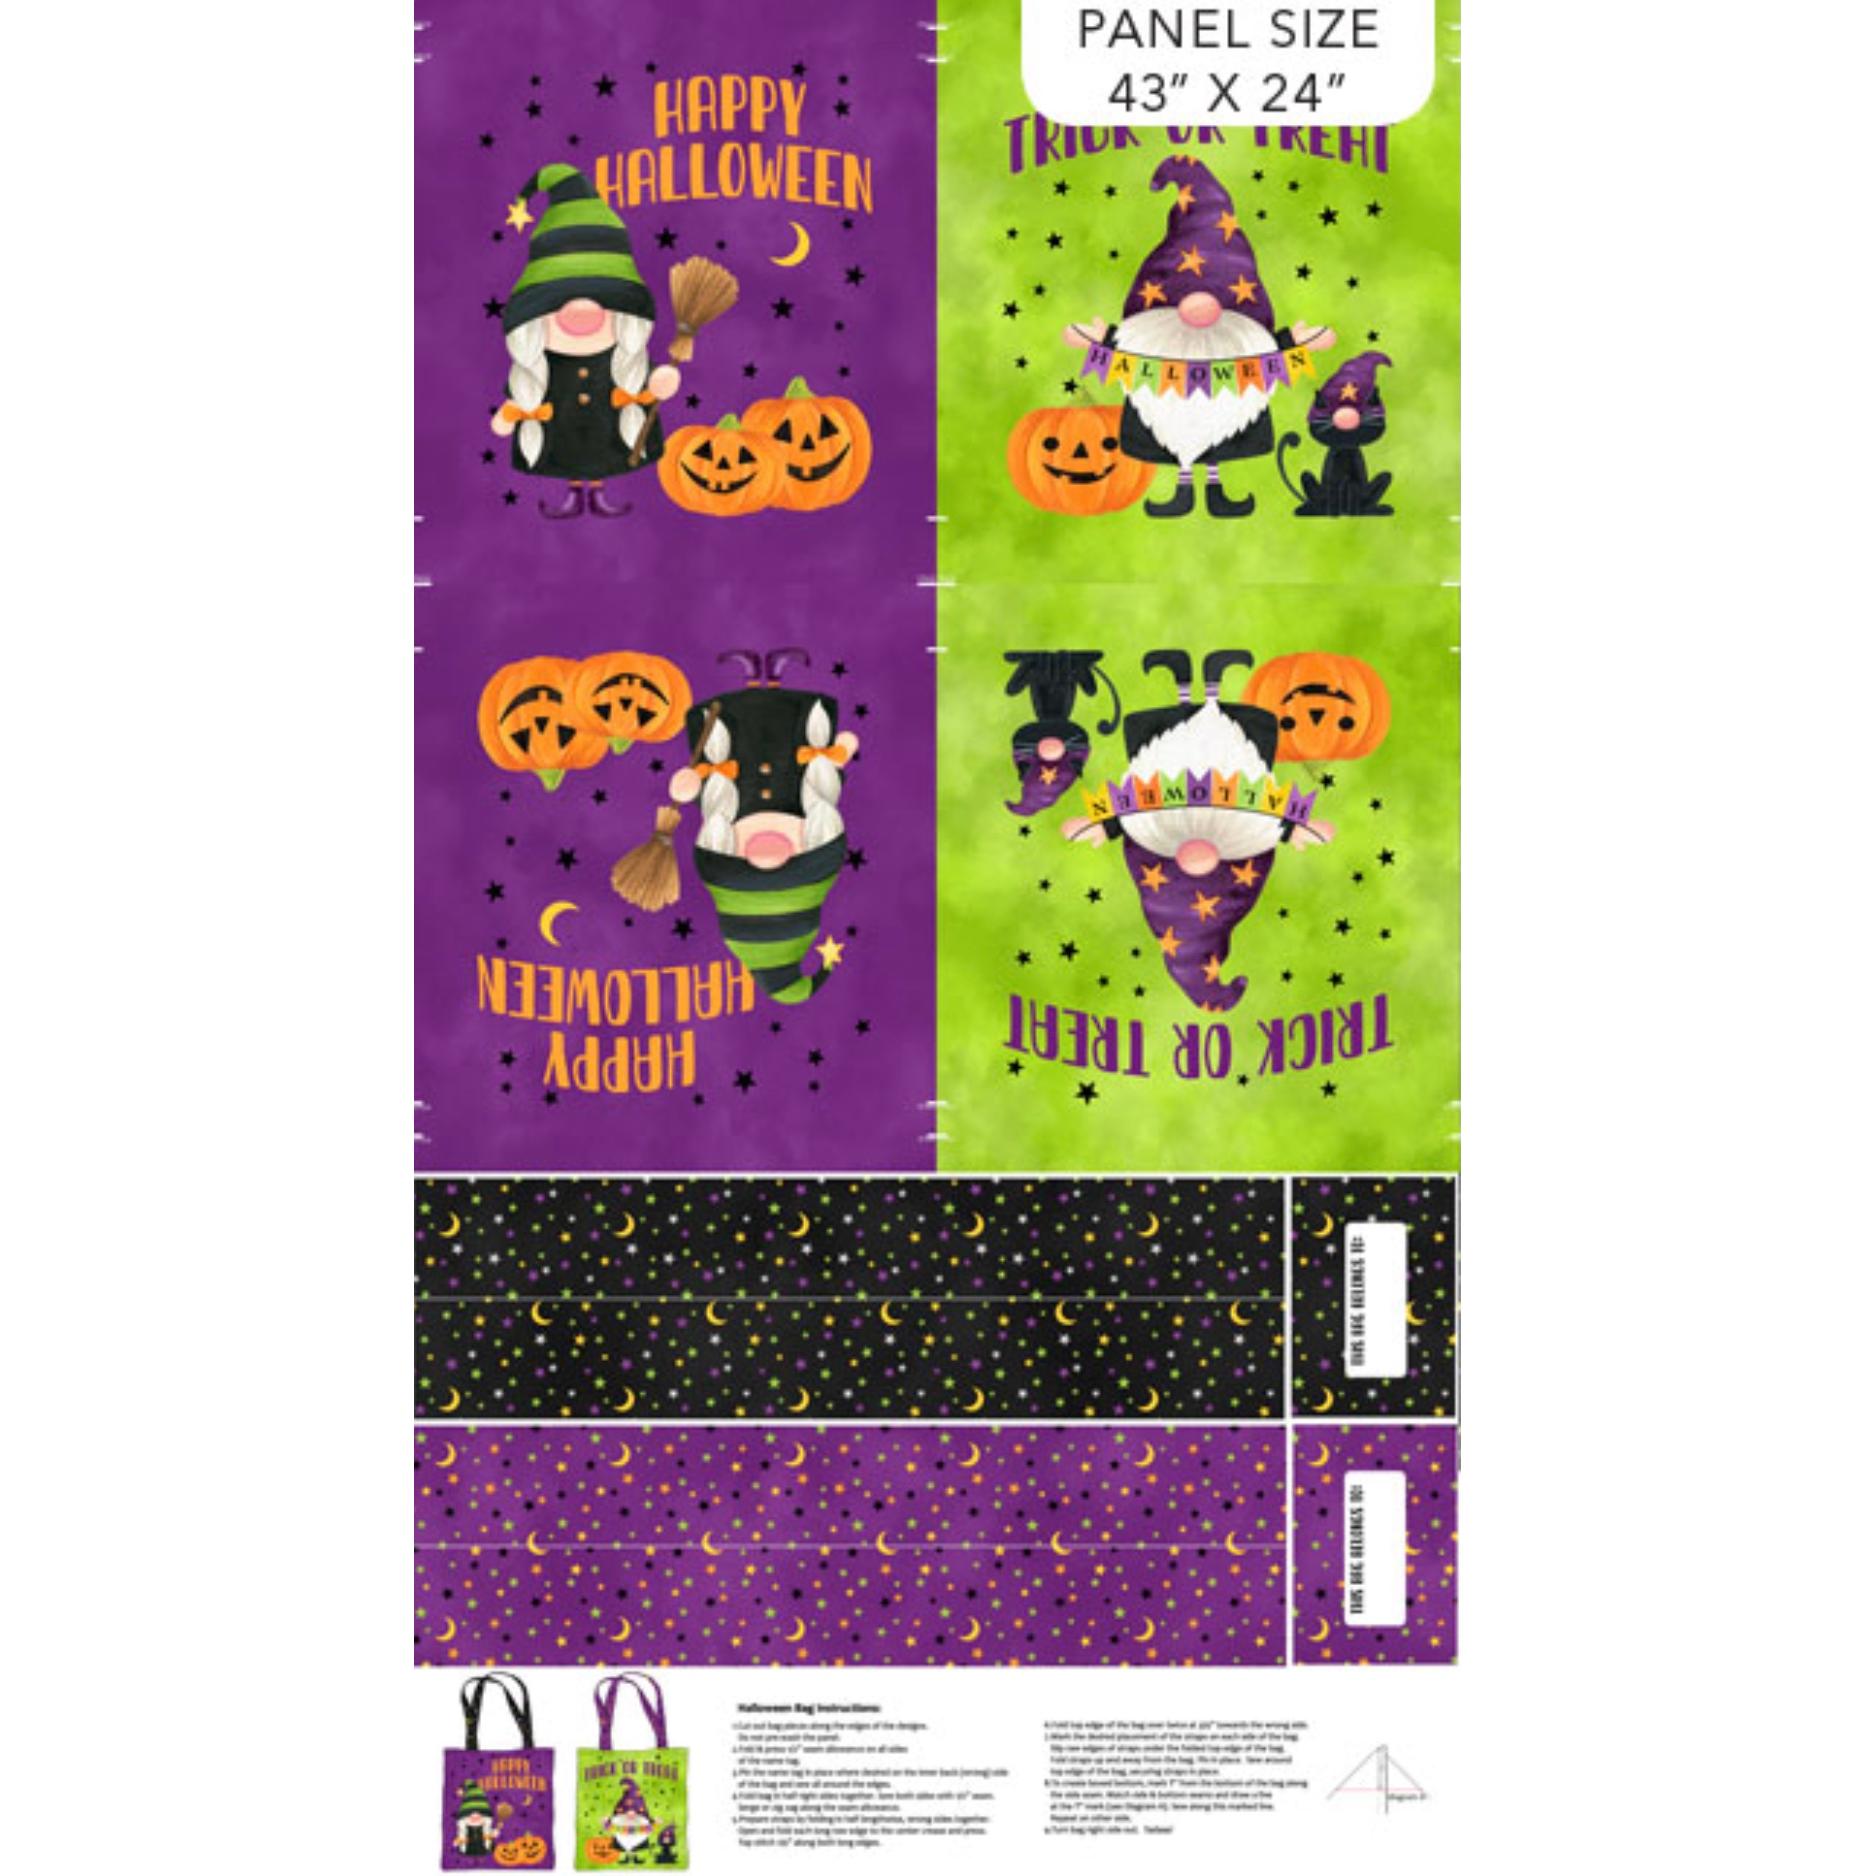 Gnomes Night Out Trick or Treat Bag Panel 24"x 43/44"-Northcott Fabrics-My Favorite Quilt Store